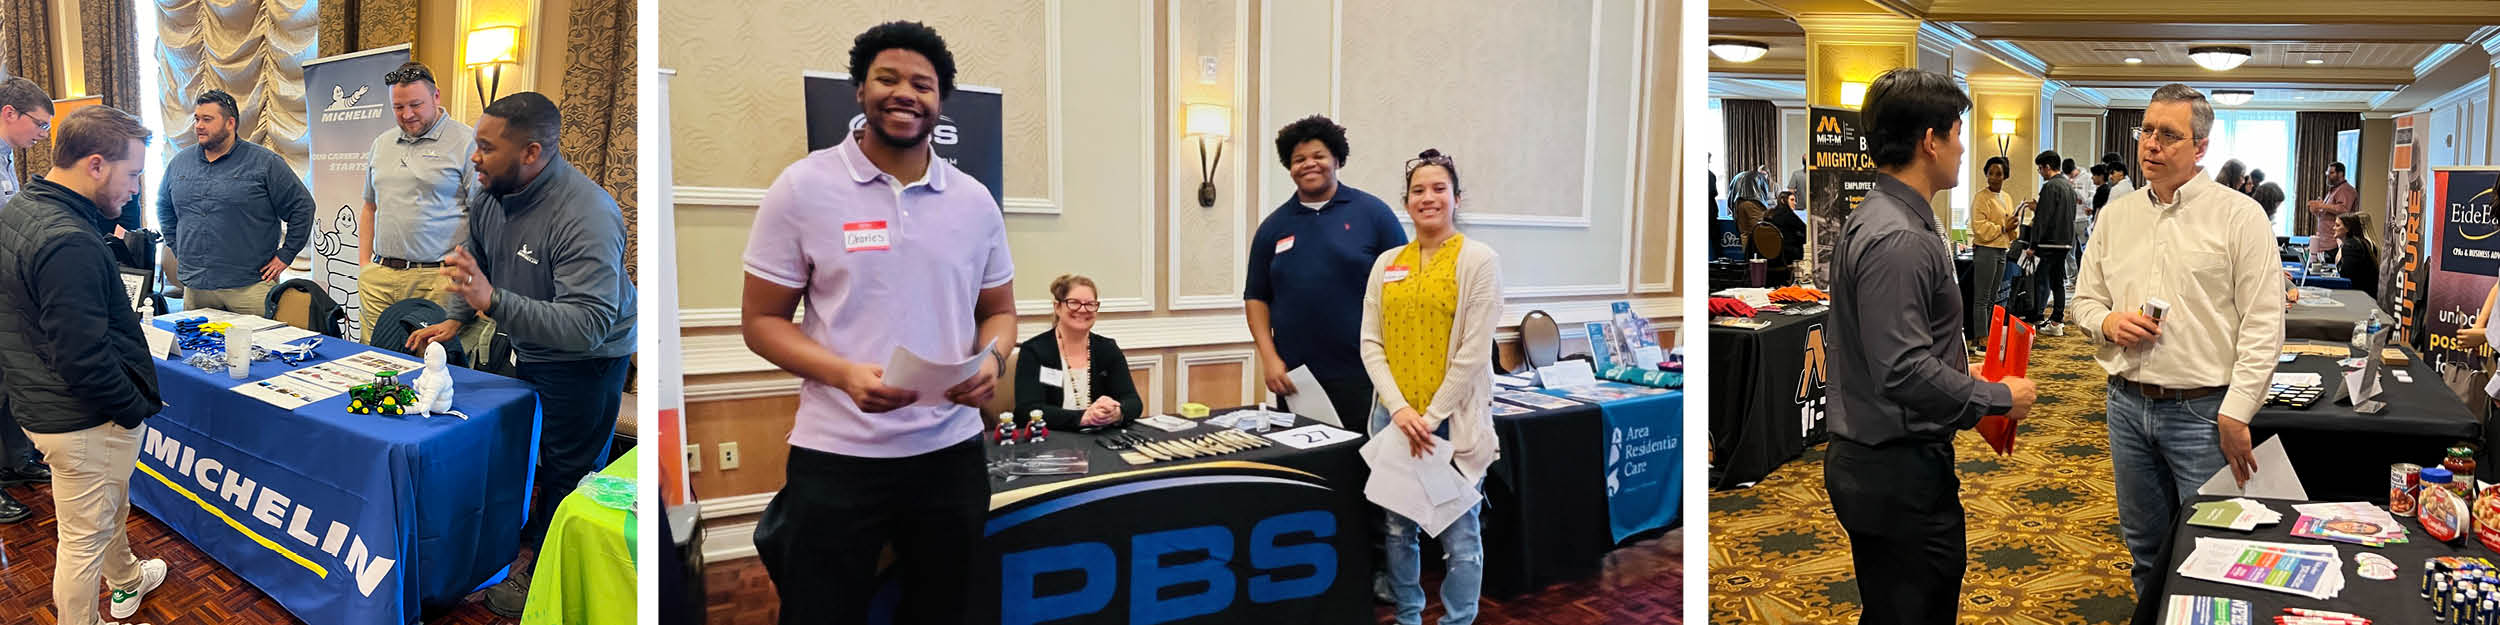 AccessDubuqueJobs.com Spring Career Fair Drives Connections and Opportunities